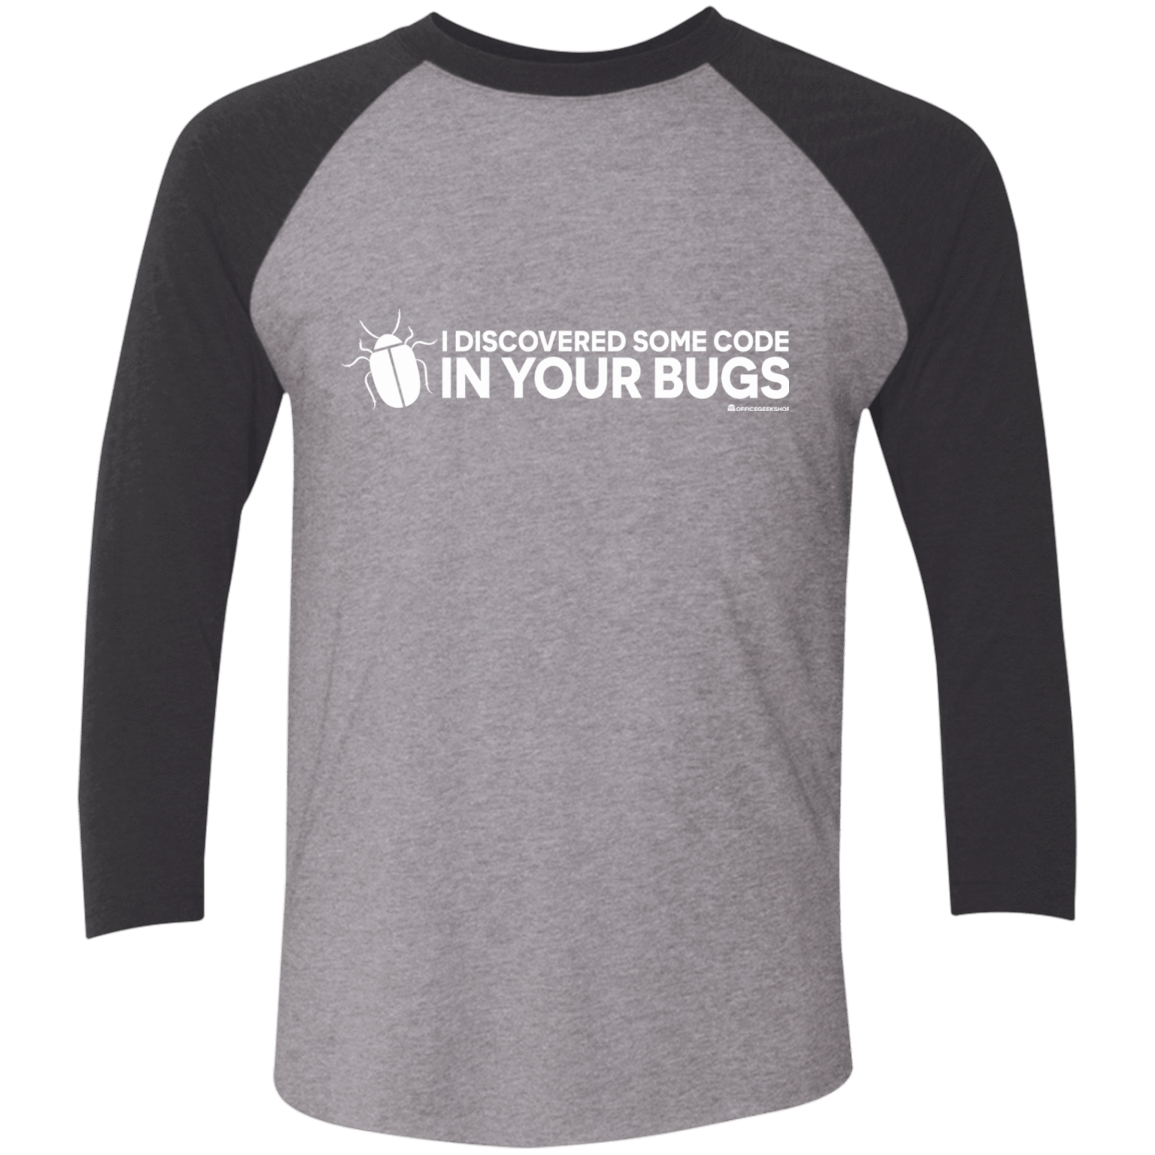 T-Shirts Premium Heather/Vintage Black / X-Small I Discovered Some Code In Your Bugs Men's Triblend 3/4 Sleeve